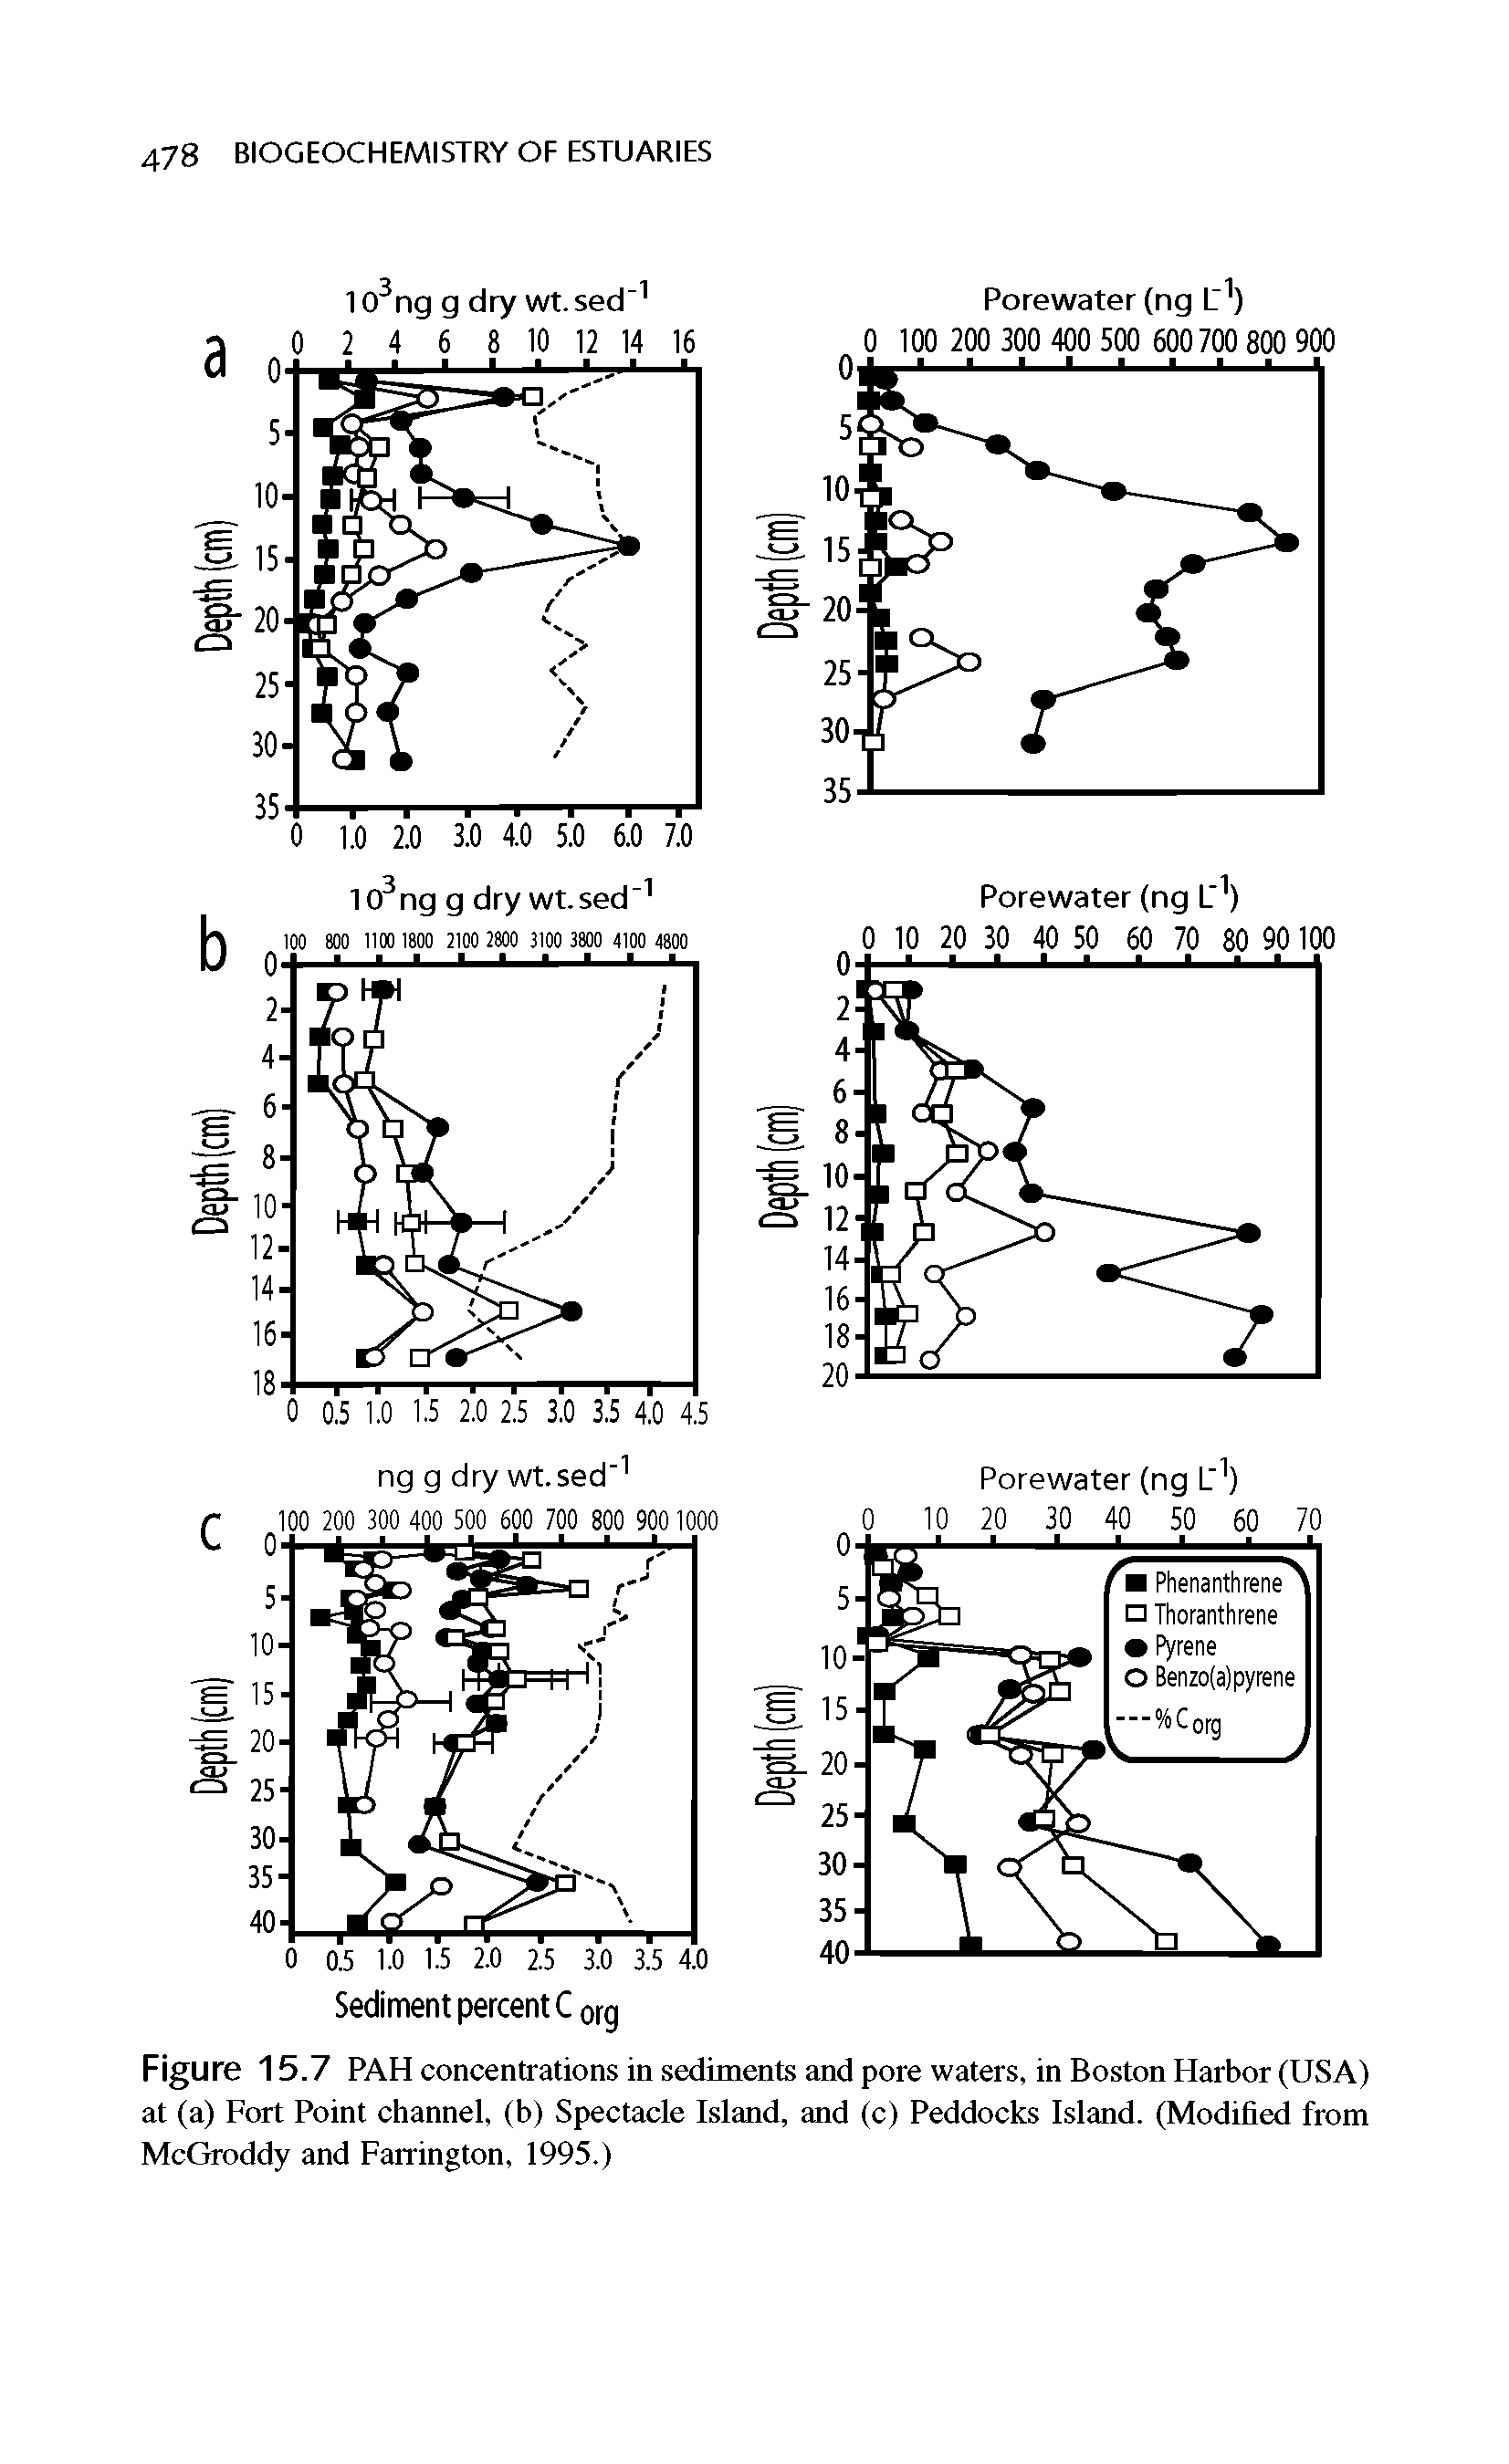 Figure 15.7 PAH concentrations in sediments and pore waters, in Boston Harbor (USA) at (a) Fort Point channel, (b) Spectacle Island, and (c) Peddocks Island. (Modified from McGroddy and Farrington, 1995.)...